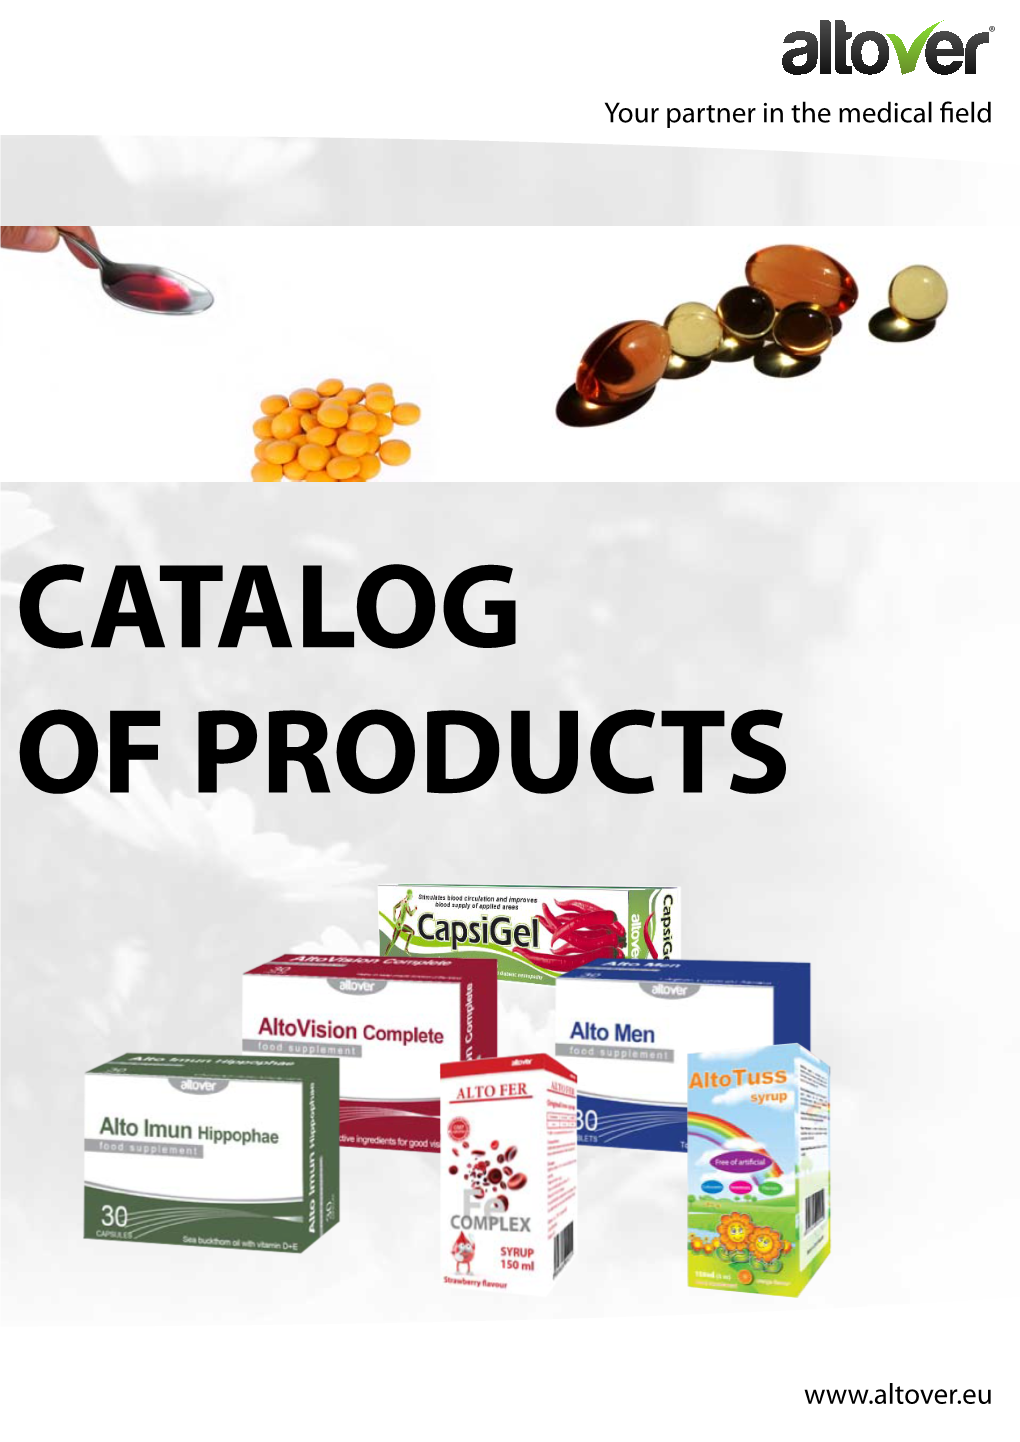 Catalog of Products